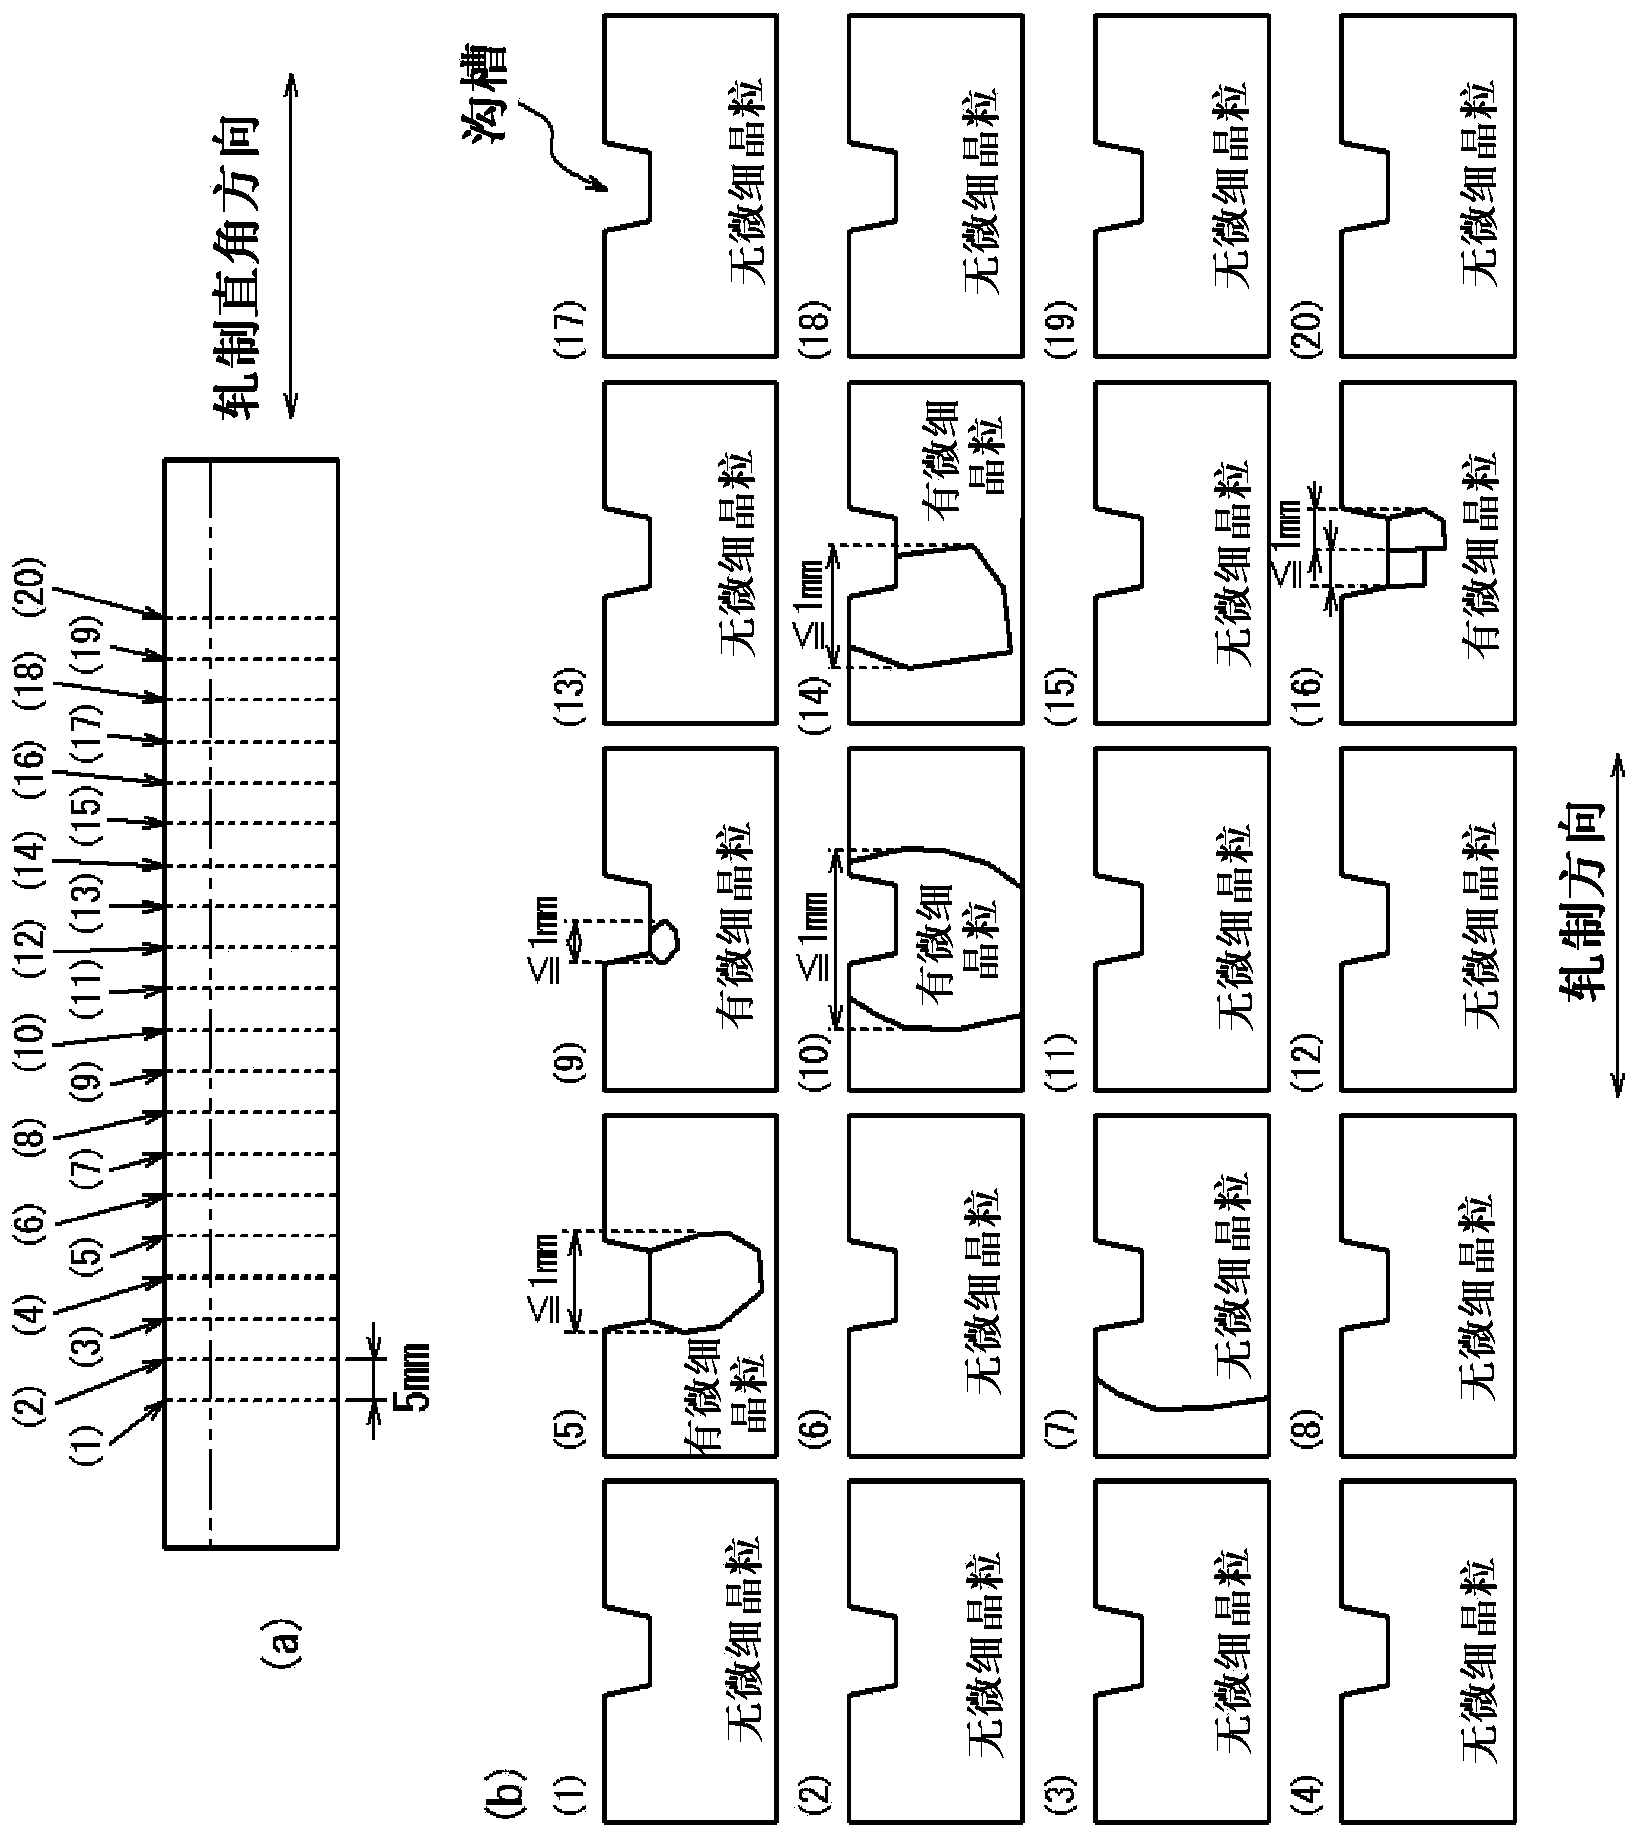 Grain-oriented electrical steel sheet and method for manufacturing same